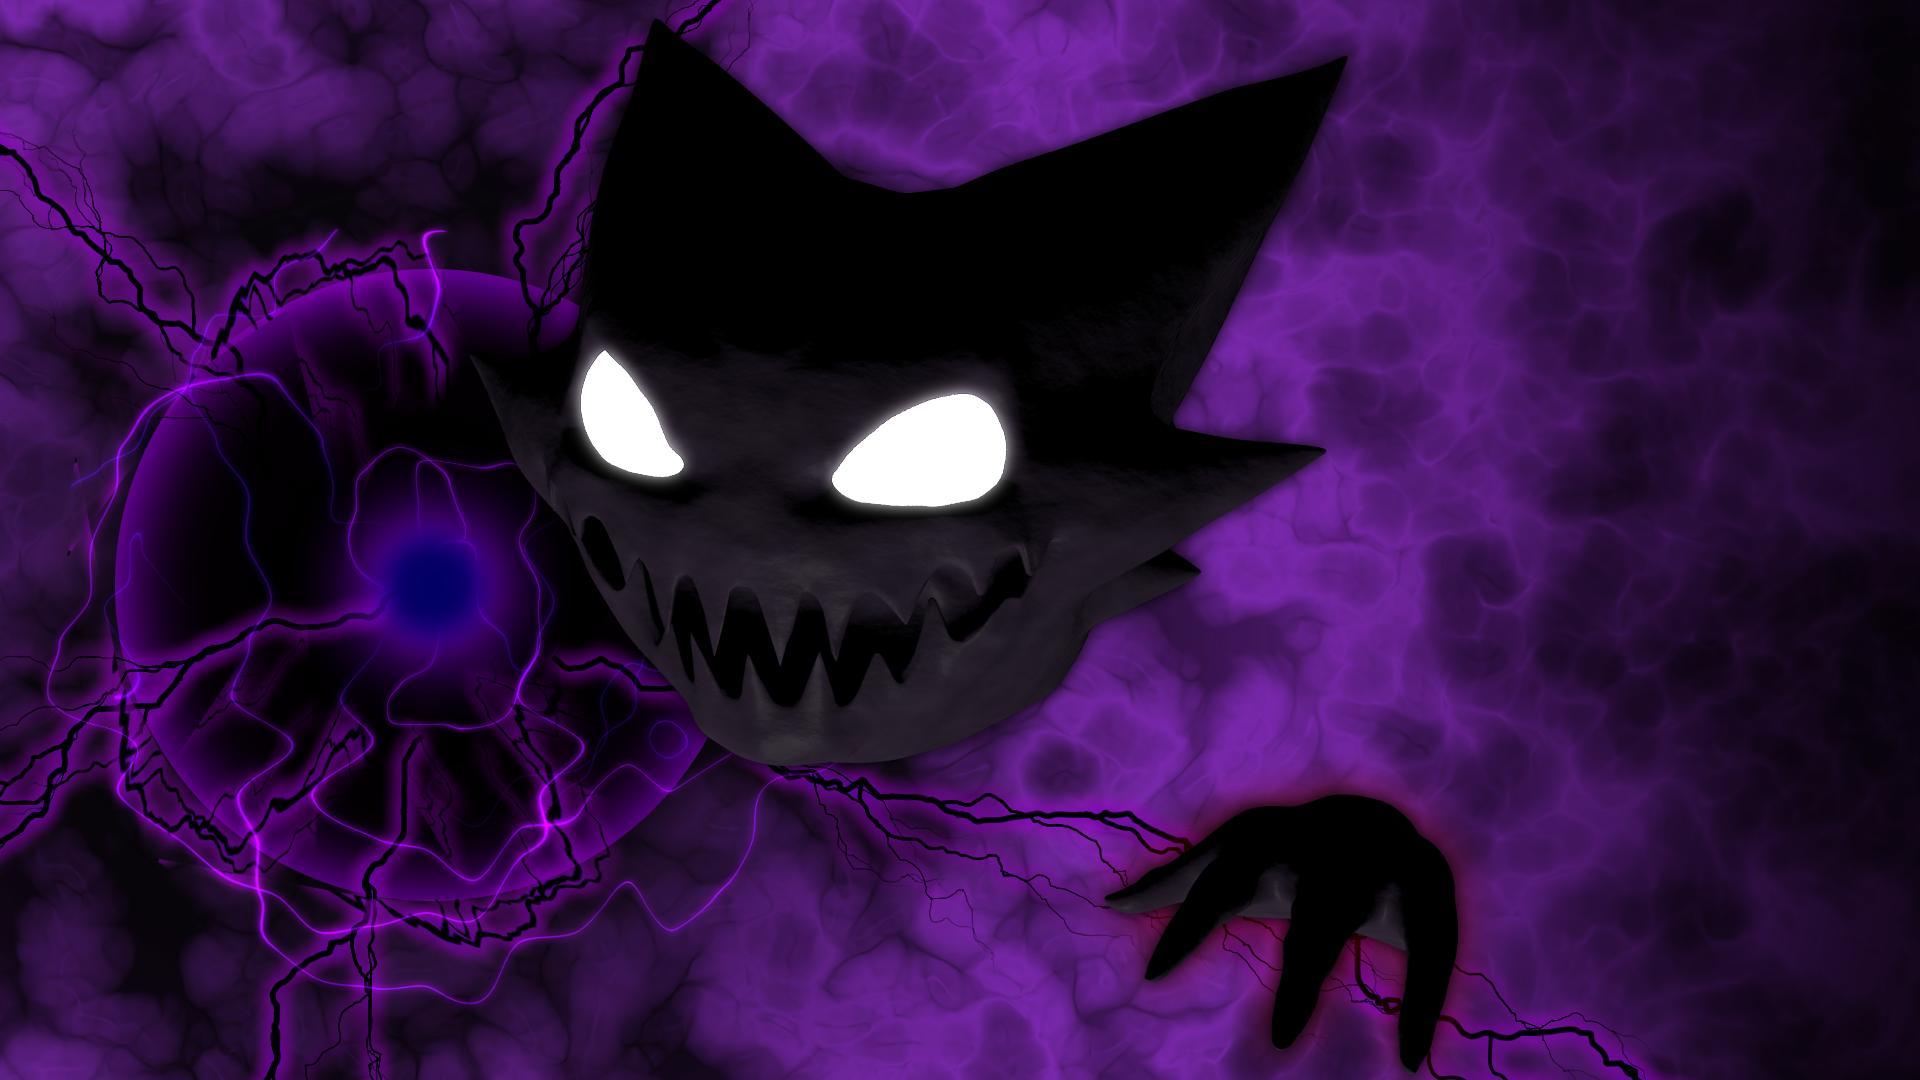 I made a Haunter using shadowball (wallpaper quality 1920x1080) what do you guys think?